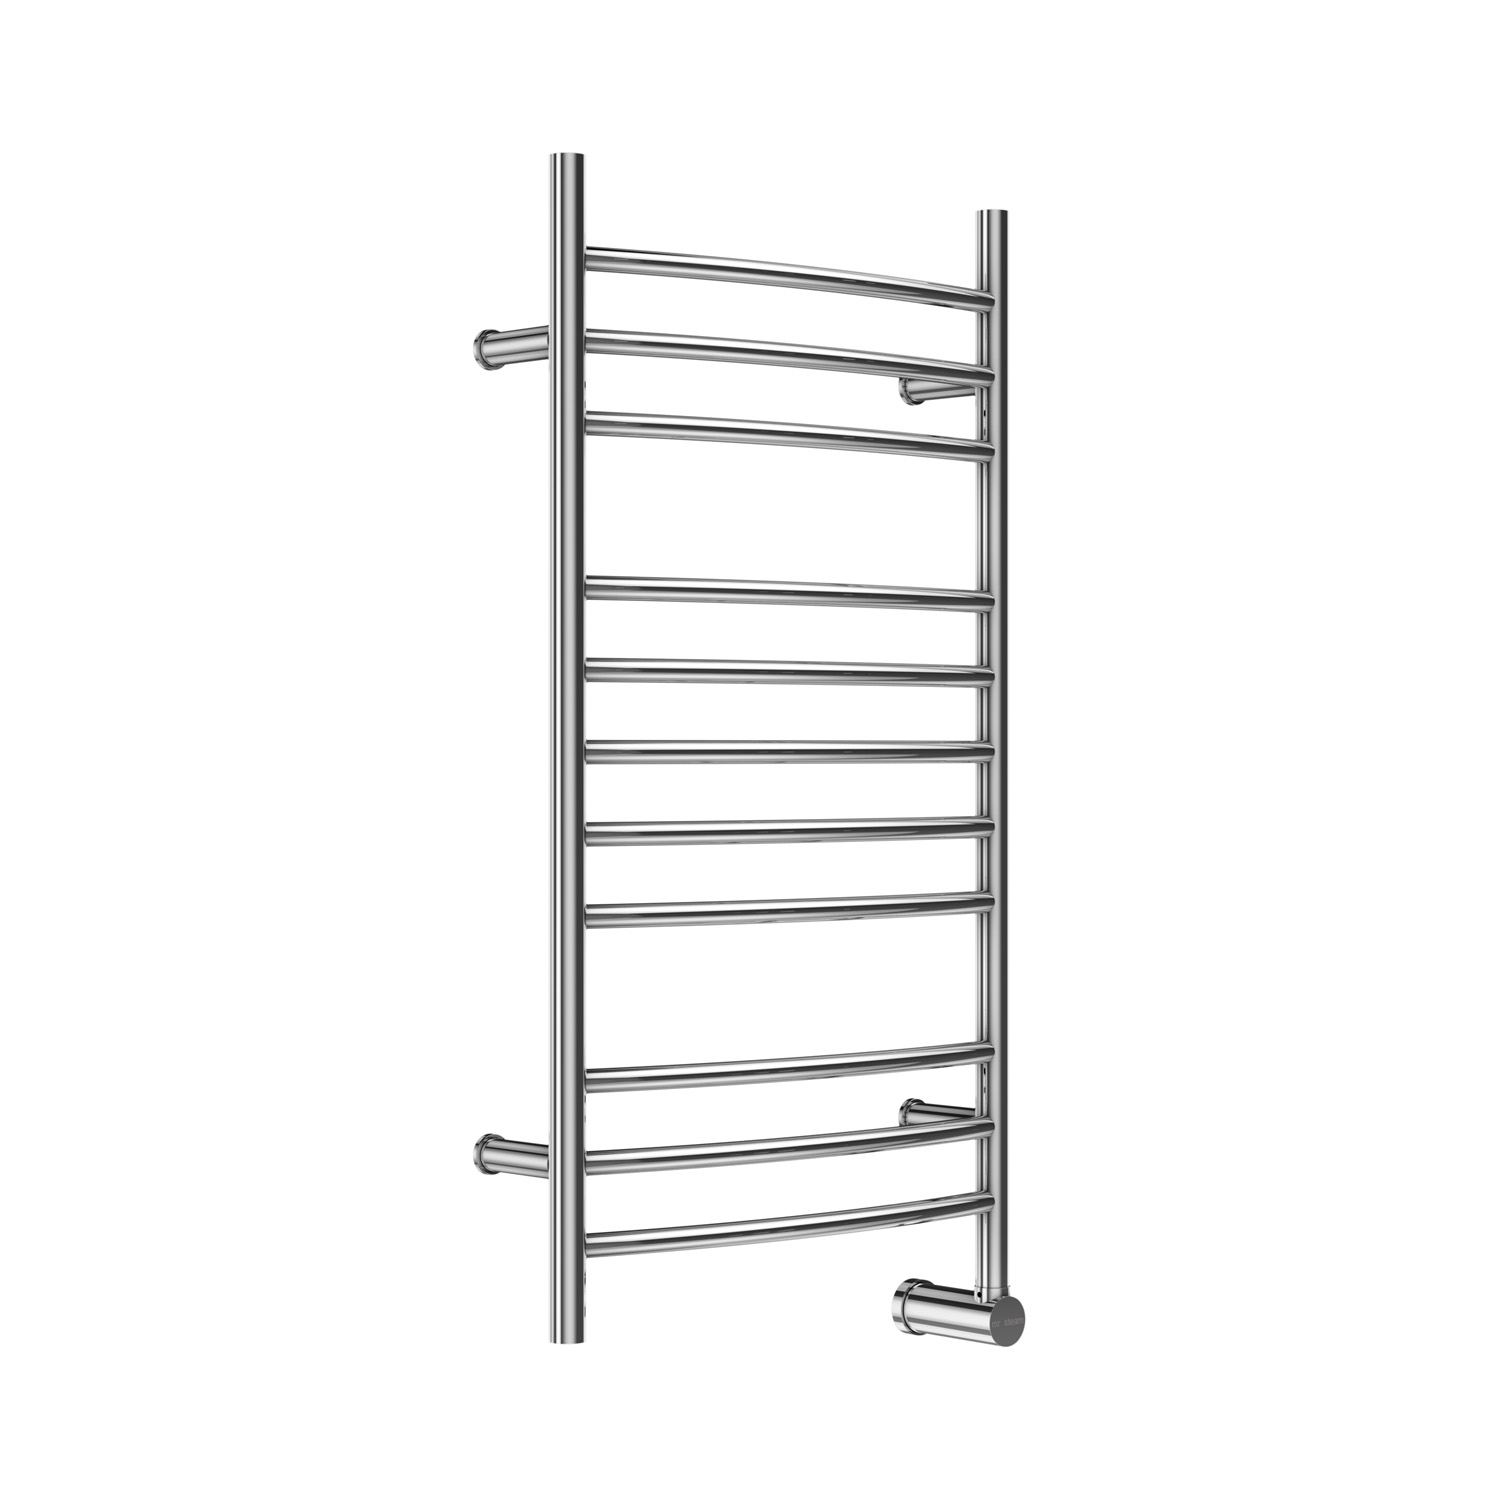 Mr Steam W336TSSB Metro Collection 11-Bar Wall-Mounted Electric Towel Warmer with Digital Timer in Stainless Steel Brushed